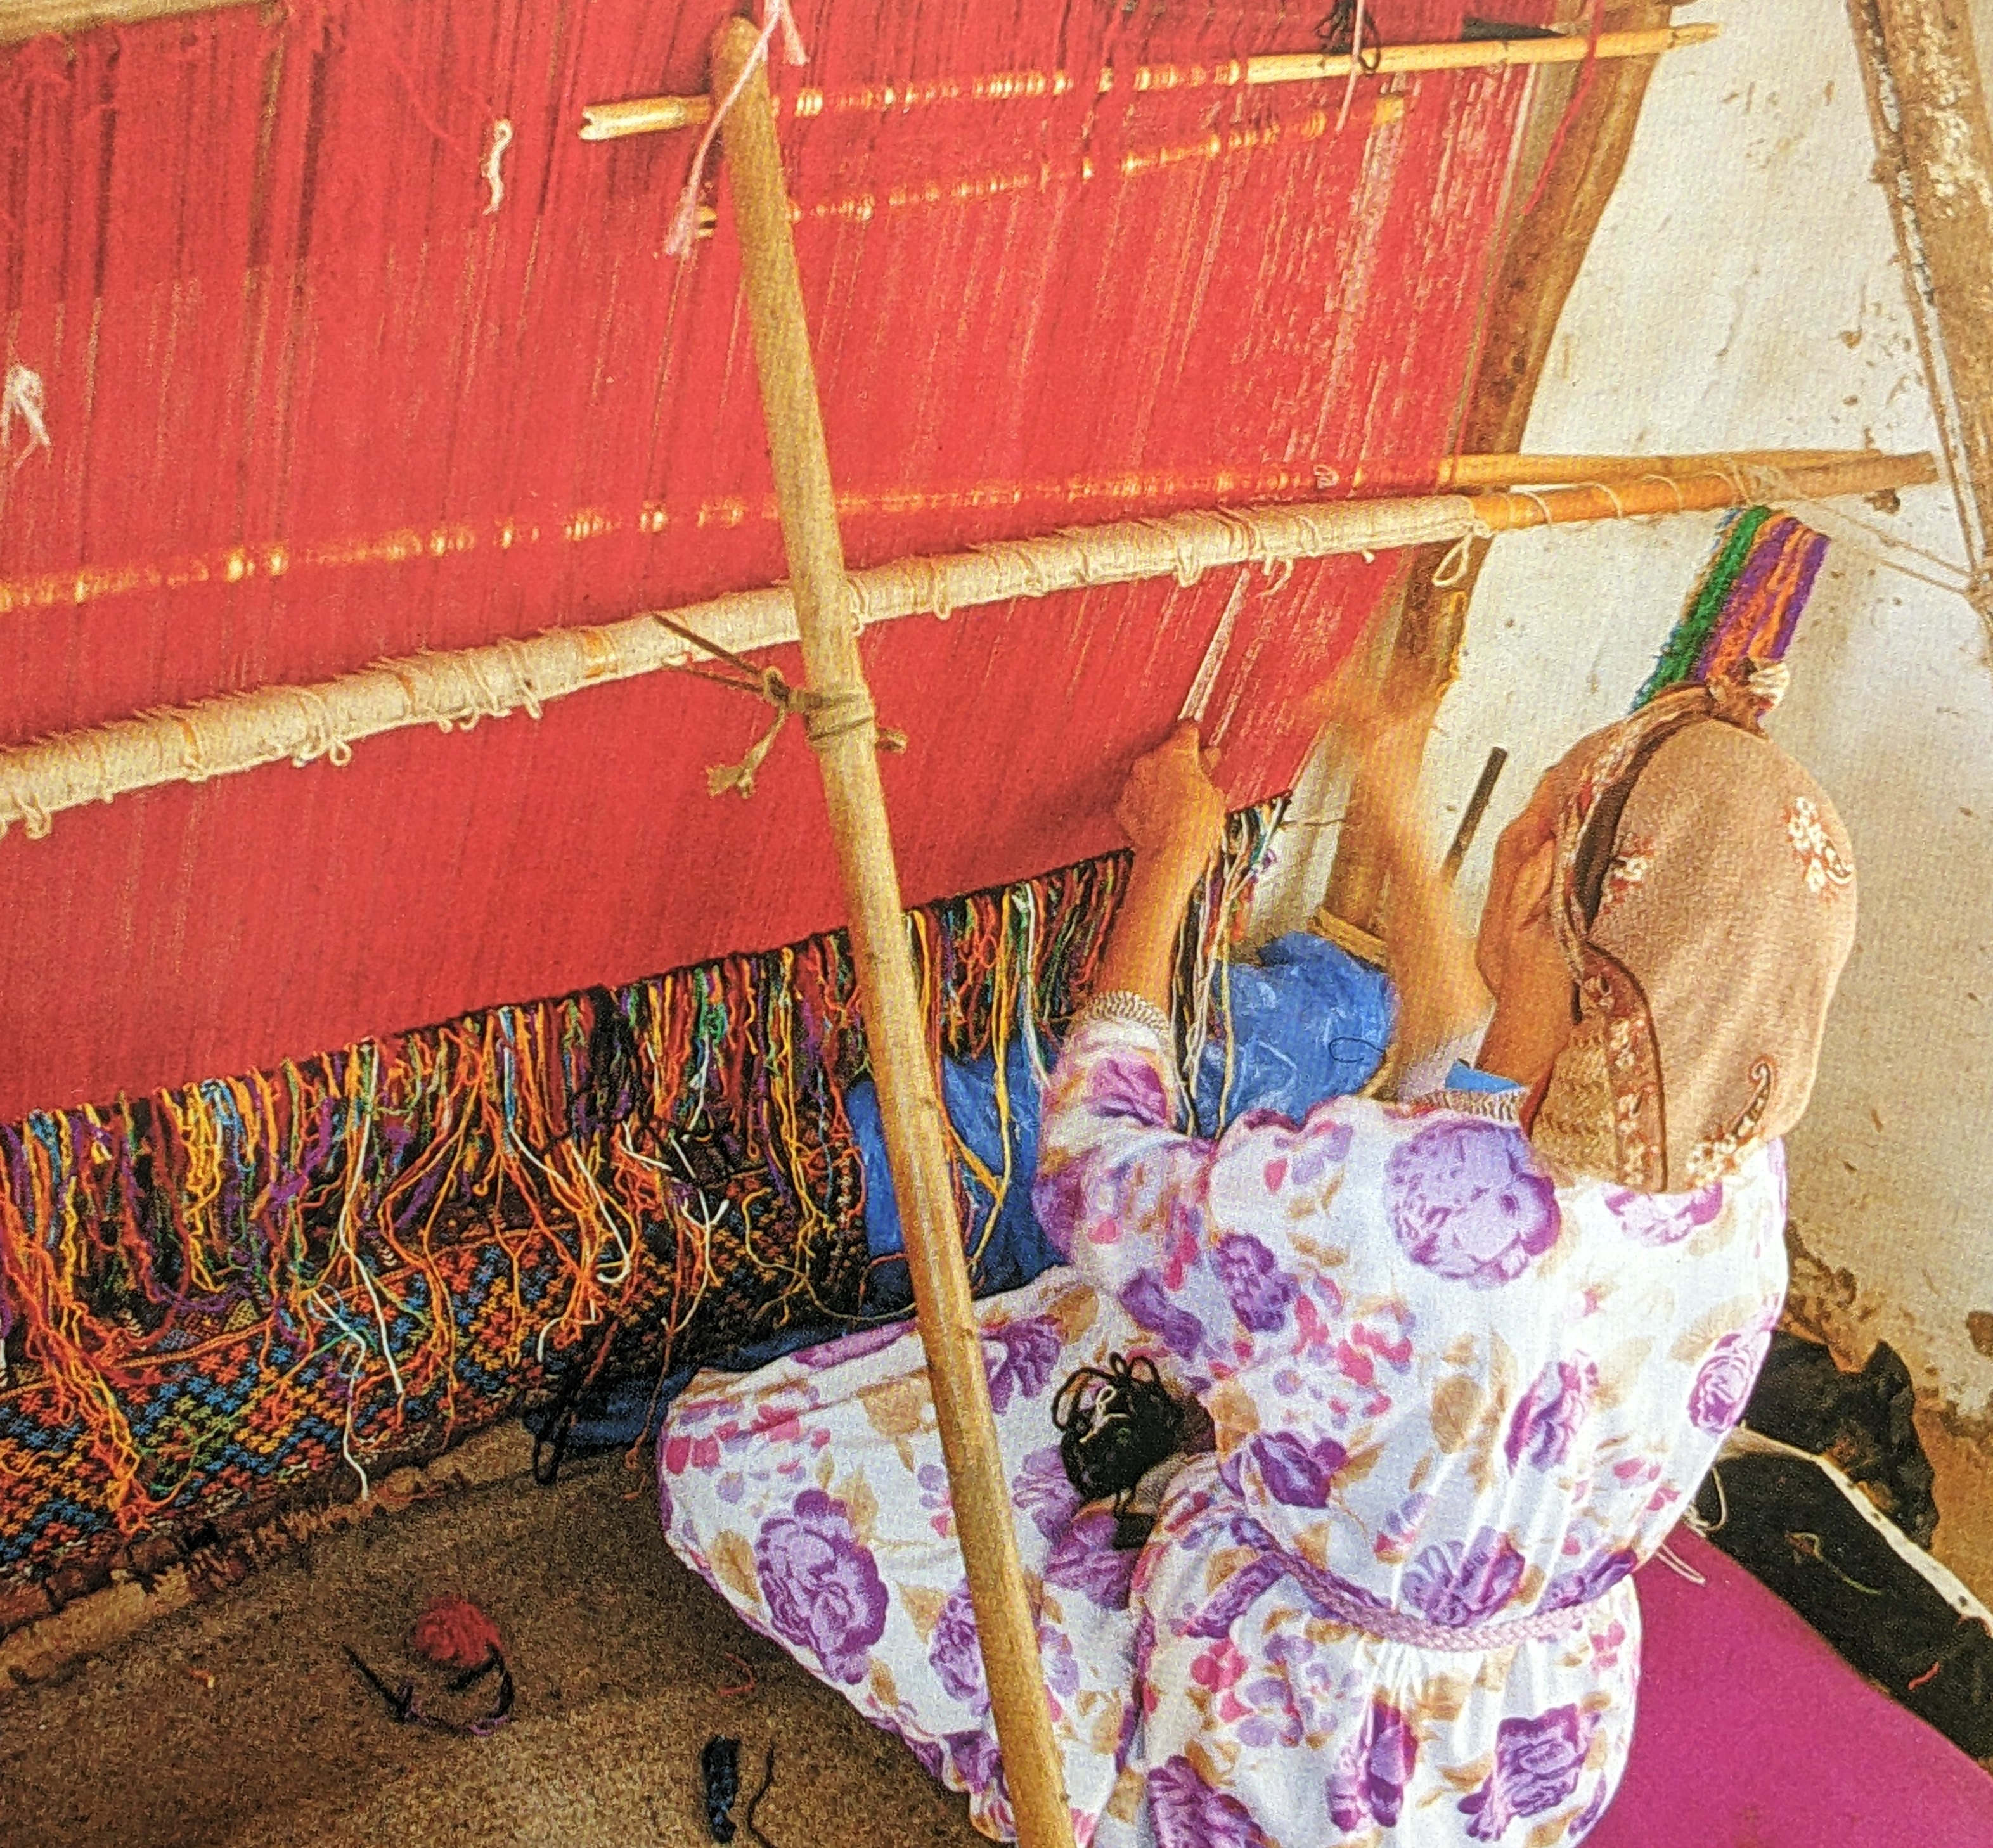 A Weaver on her loom